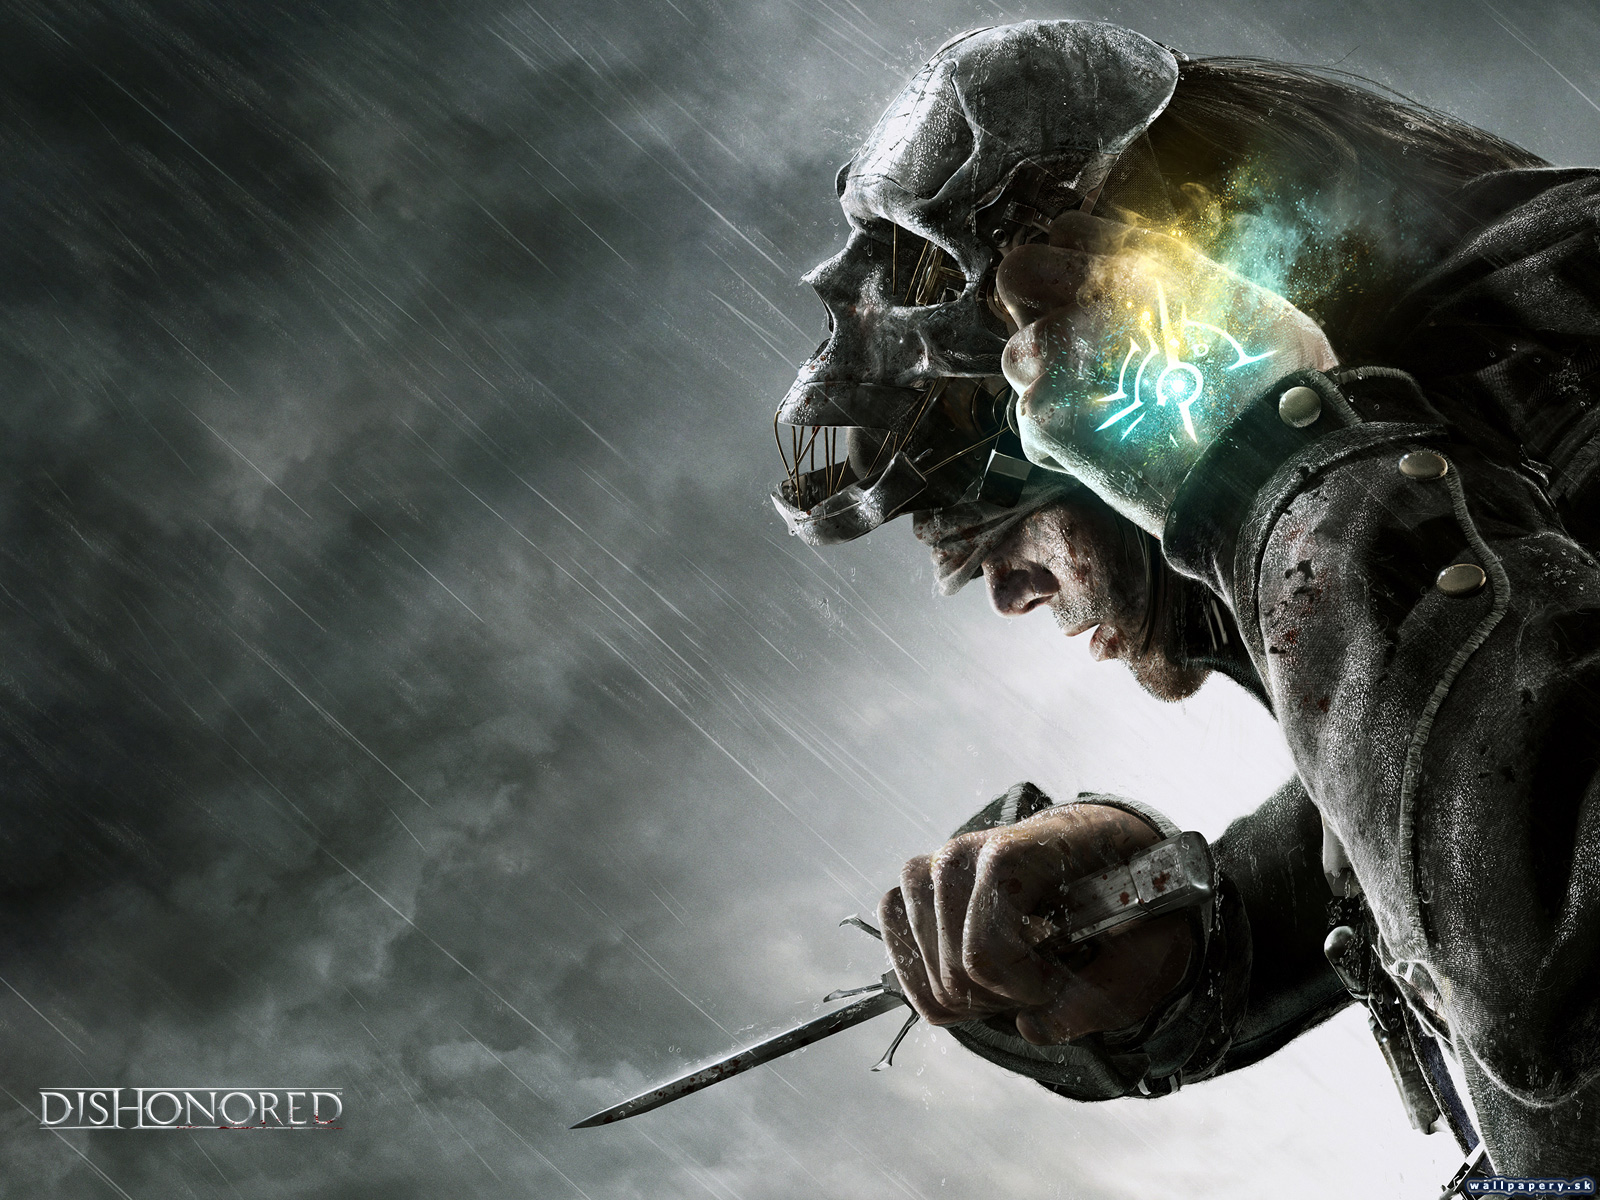 Dishonored - wallpaper 3